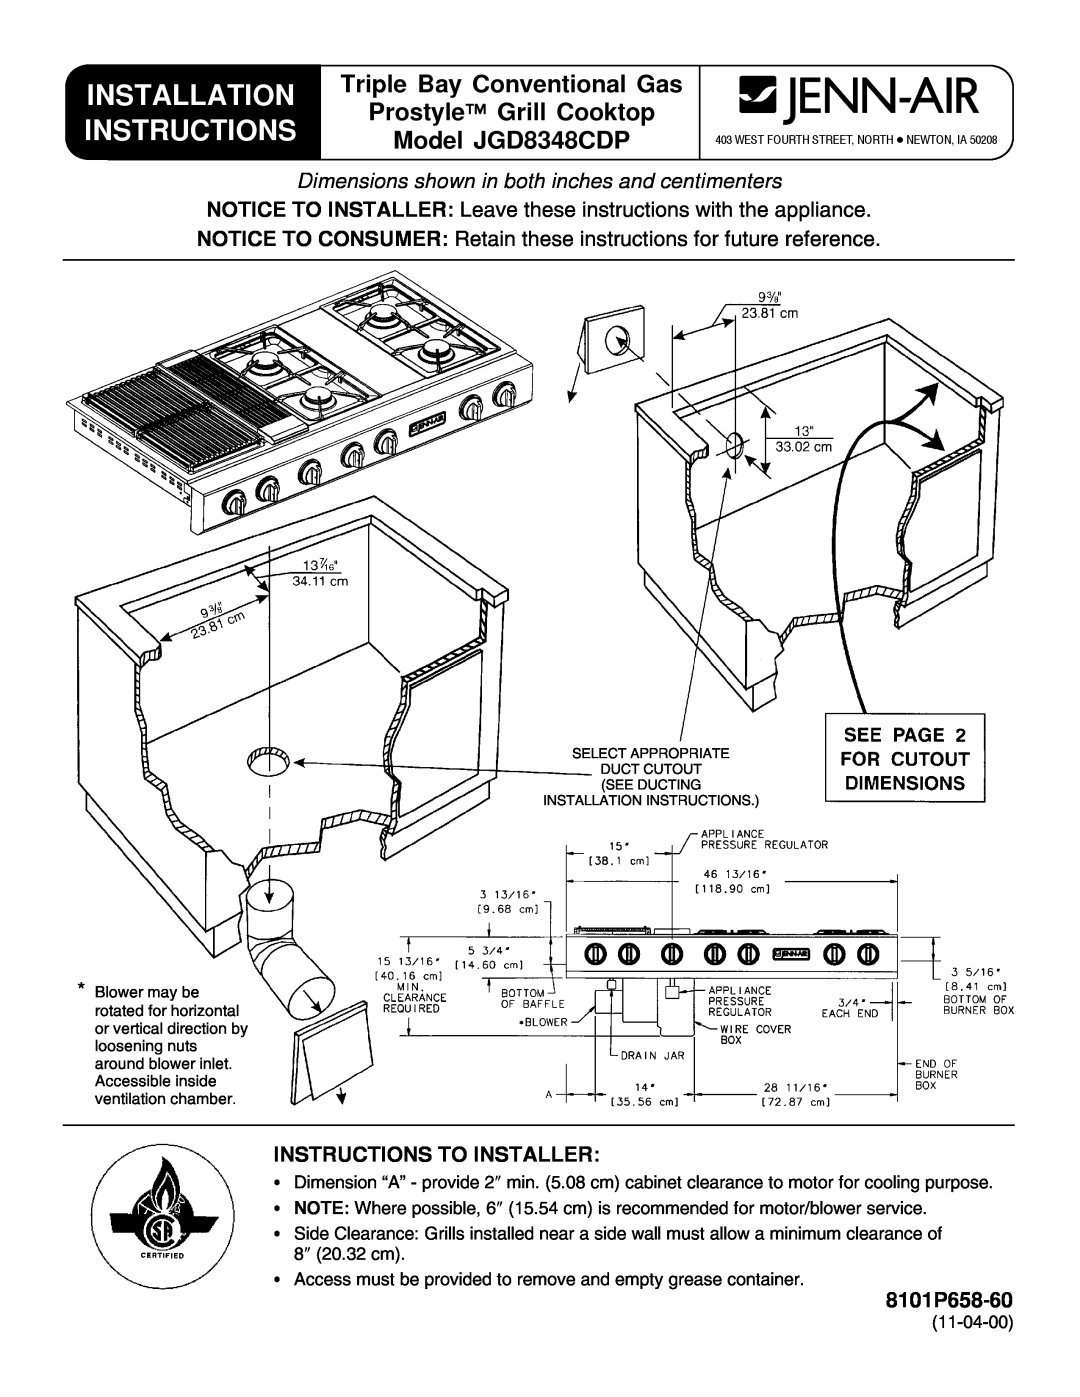 Jenn-Air installation instructions Triple Bay Conventional Gas, Prostyle Grill Cooktop, Model JGD8348CDP, 8101P620-60 